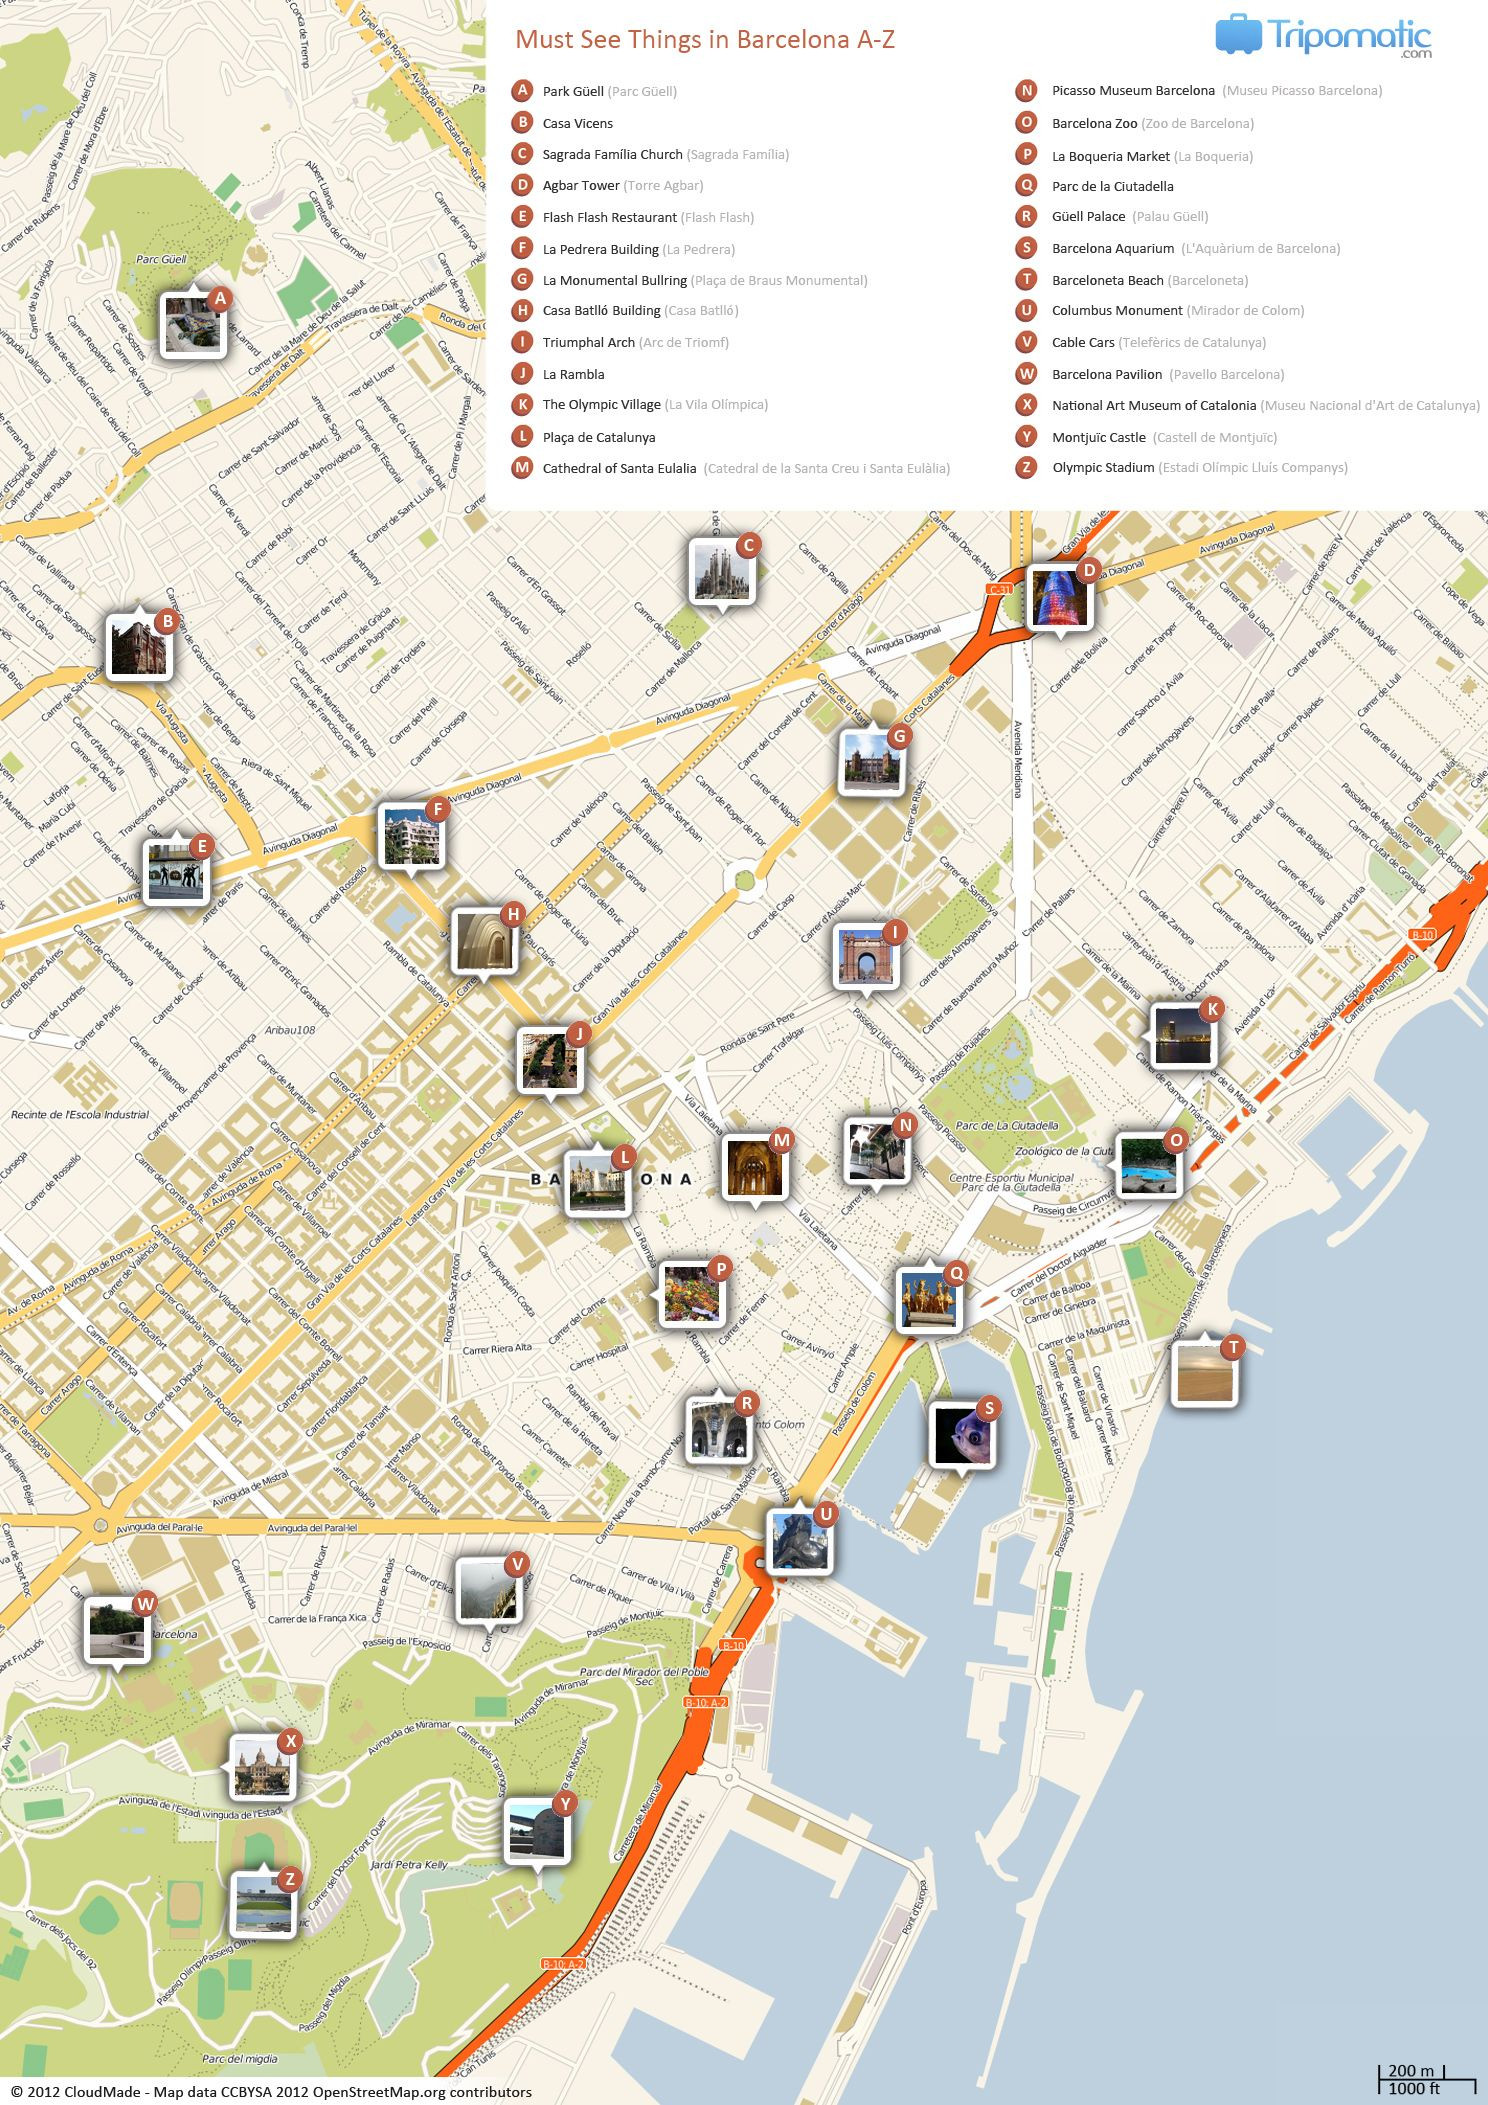 Printable Map Virginia Luxury What To See In Barcelona Adventures â°â¾ Pinterest